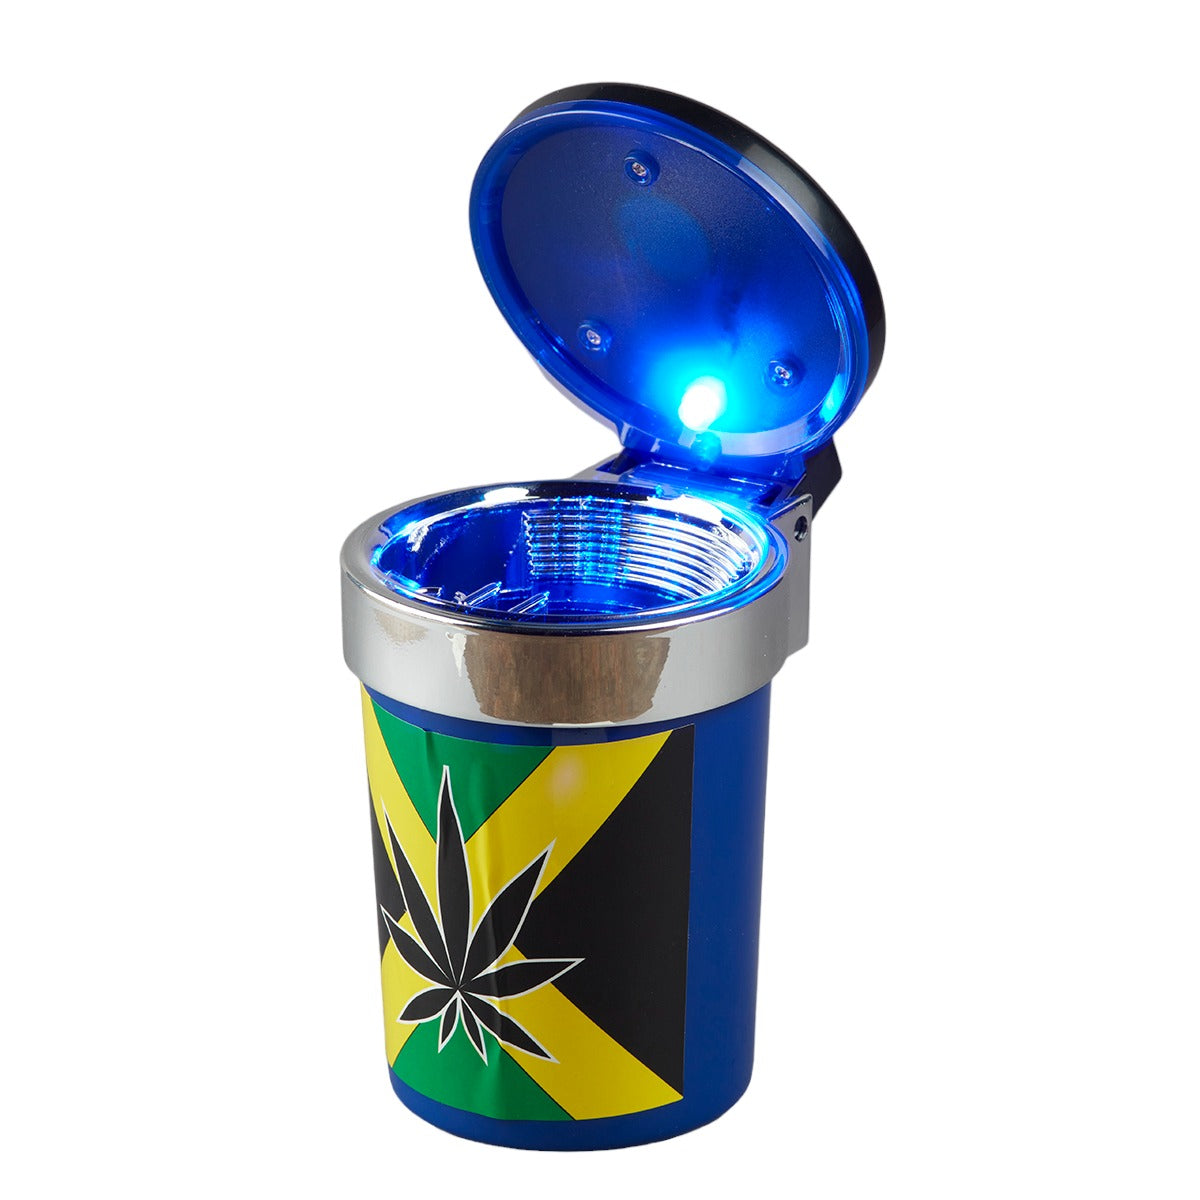 Plastic Car Ashtray Bucket with Lid and LED for Smokers (9786)